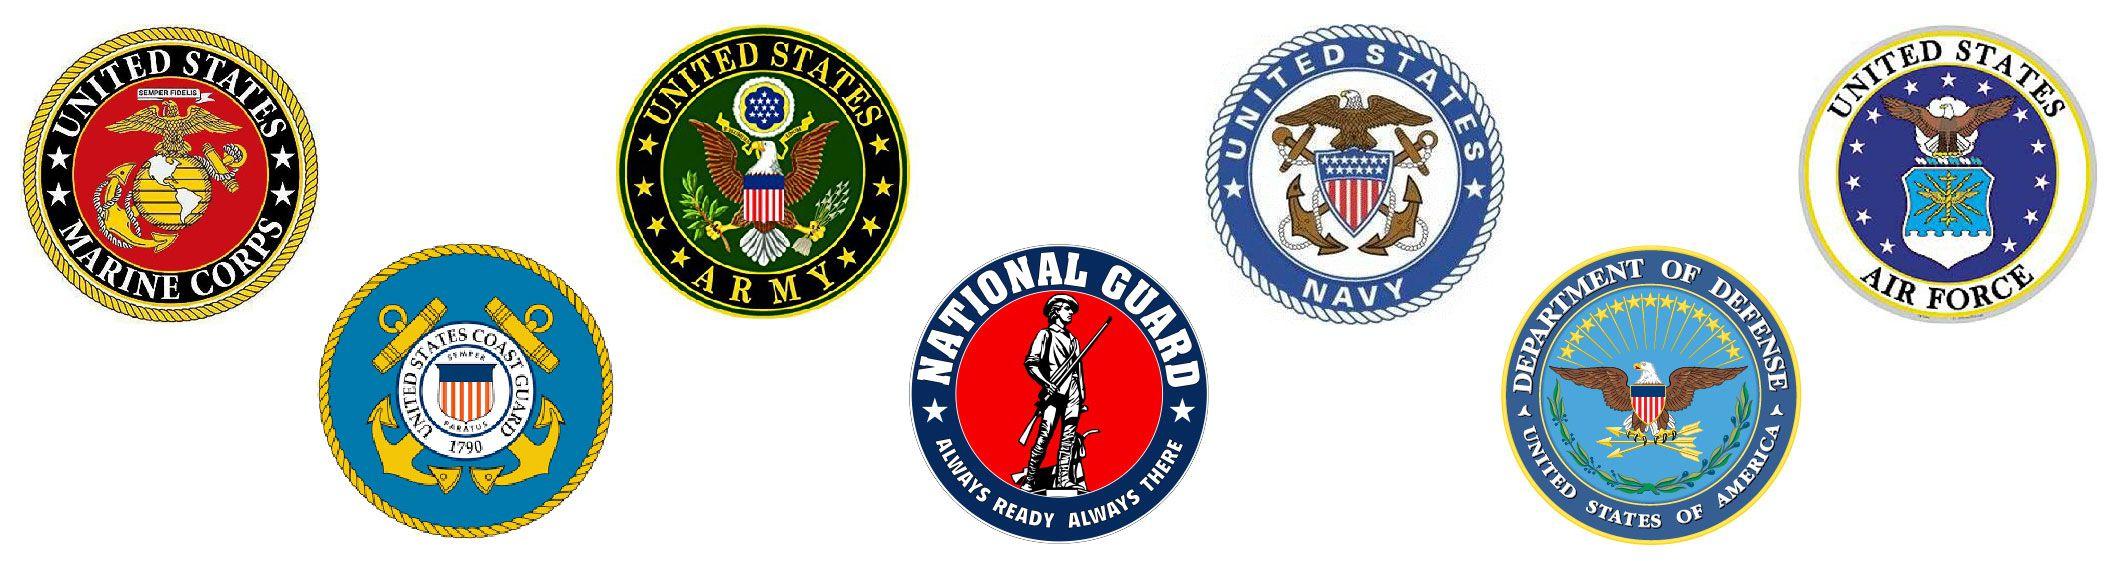 United States Military Logo - Military Learning Center of Tampa Bay. Donate & Support